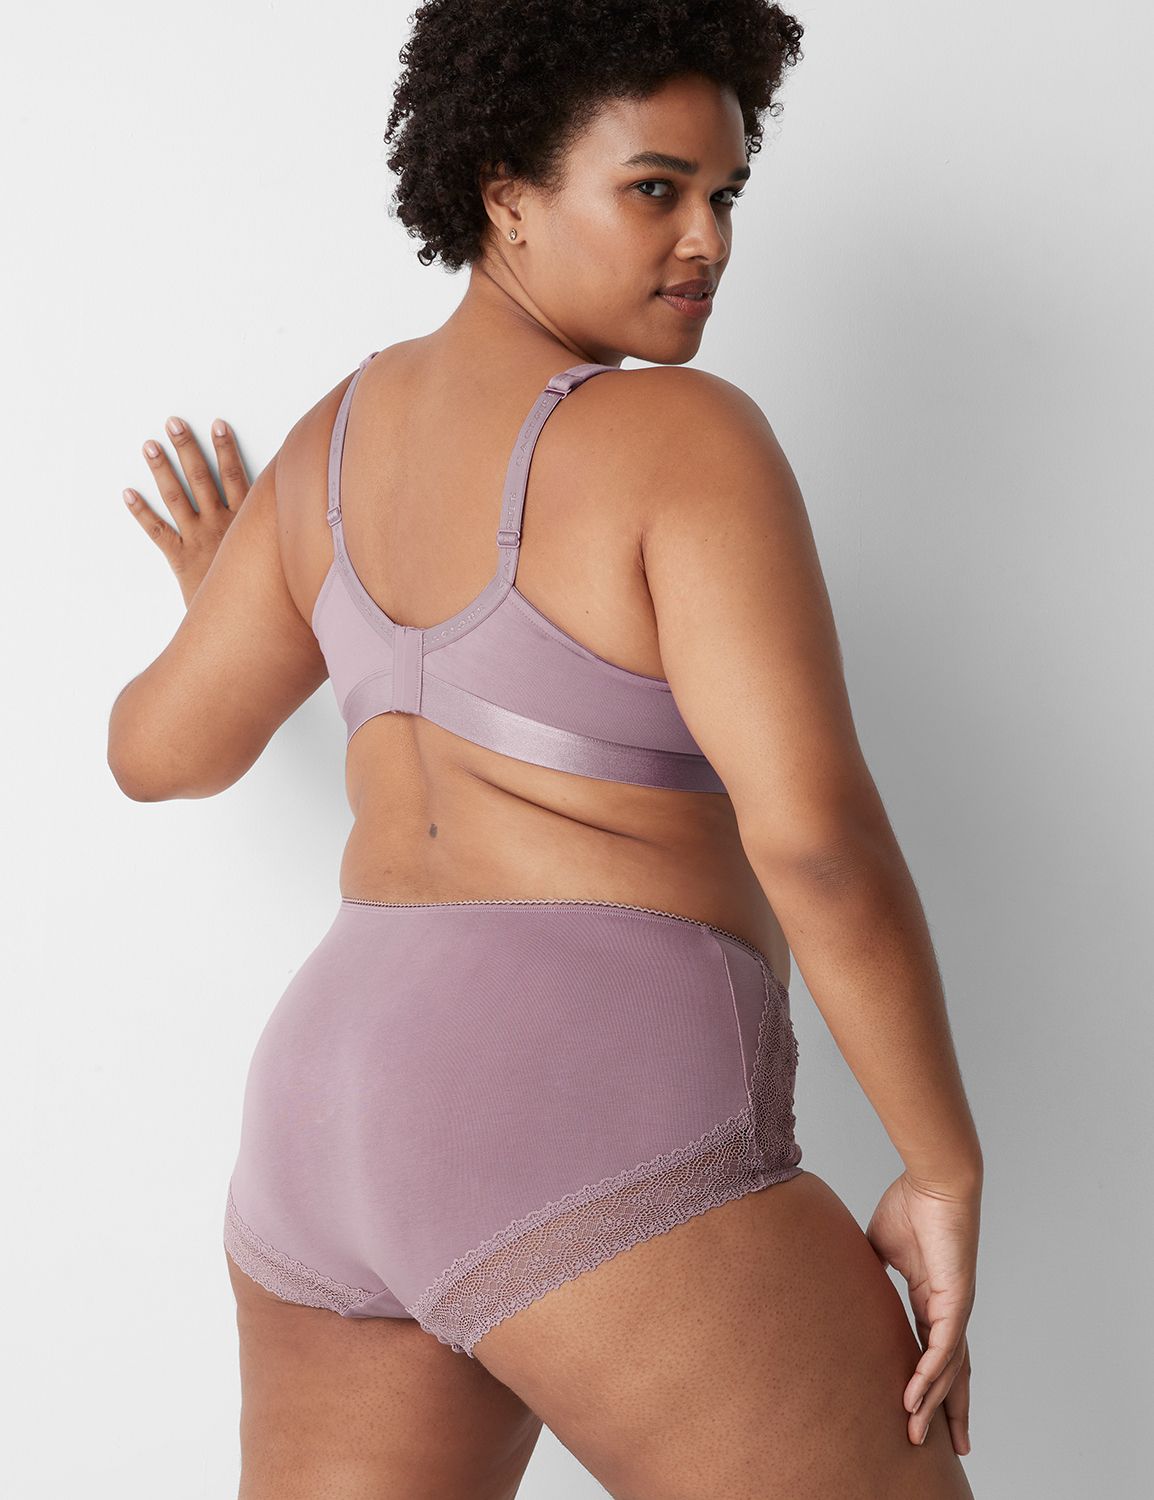 Lane Bryant - TFW every bra is on sale 😍All bras $19.50 